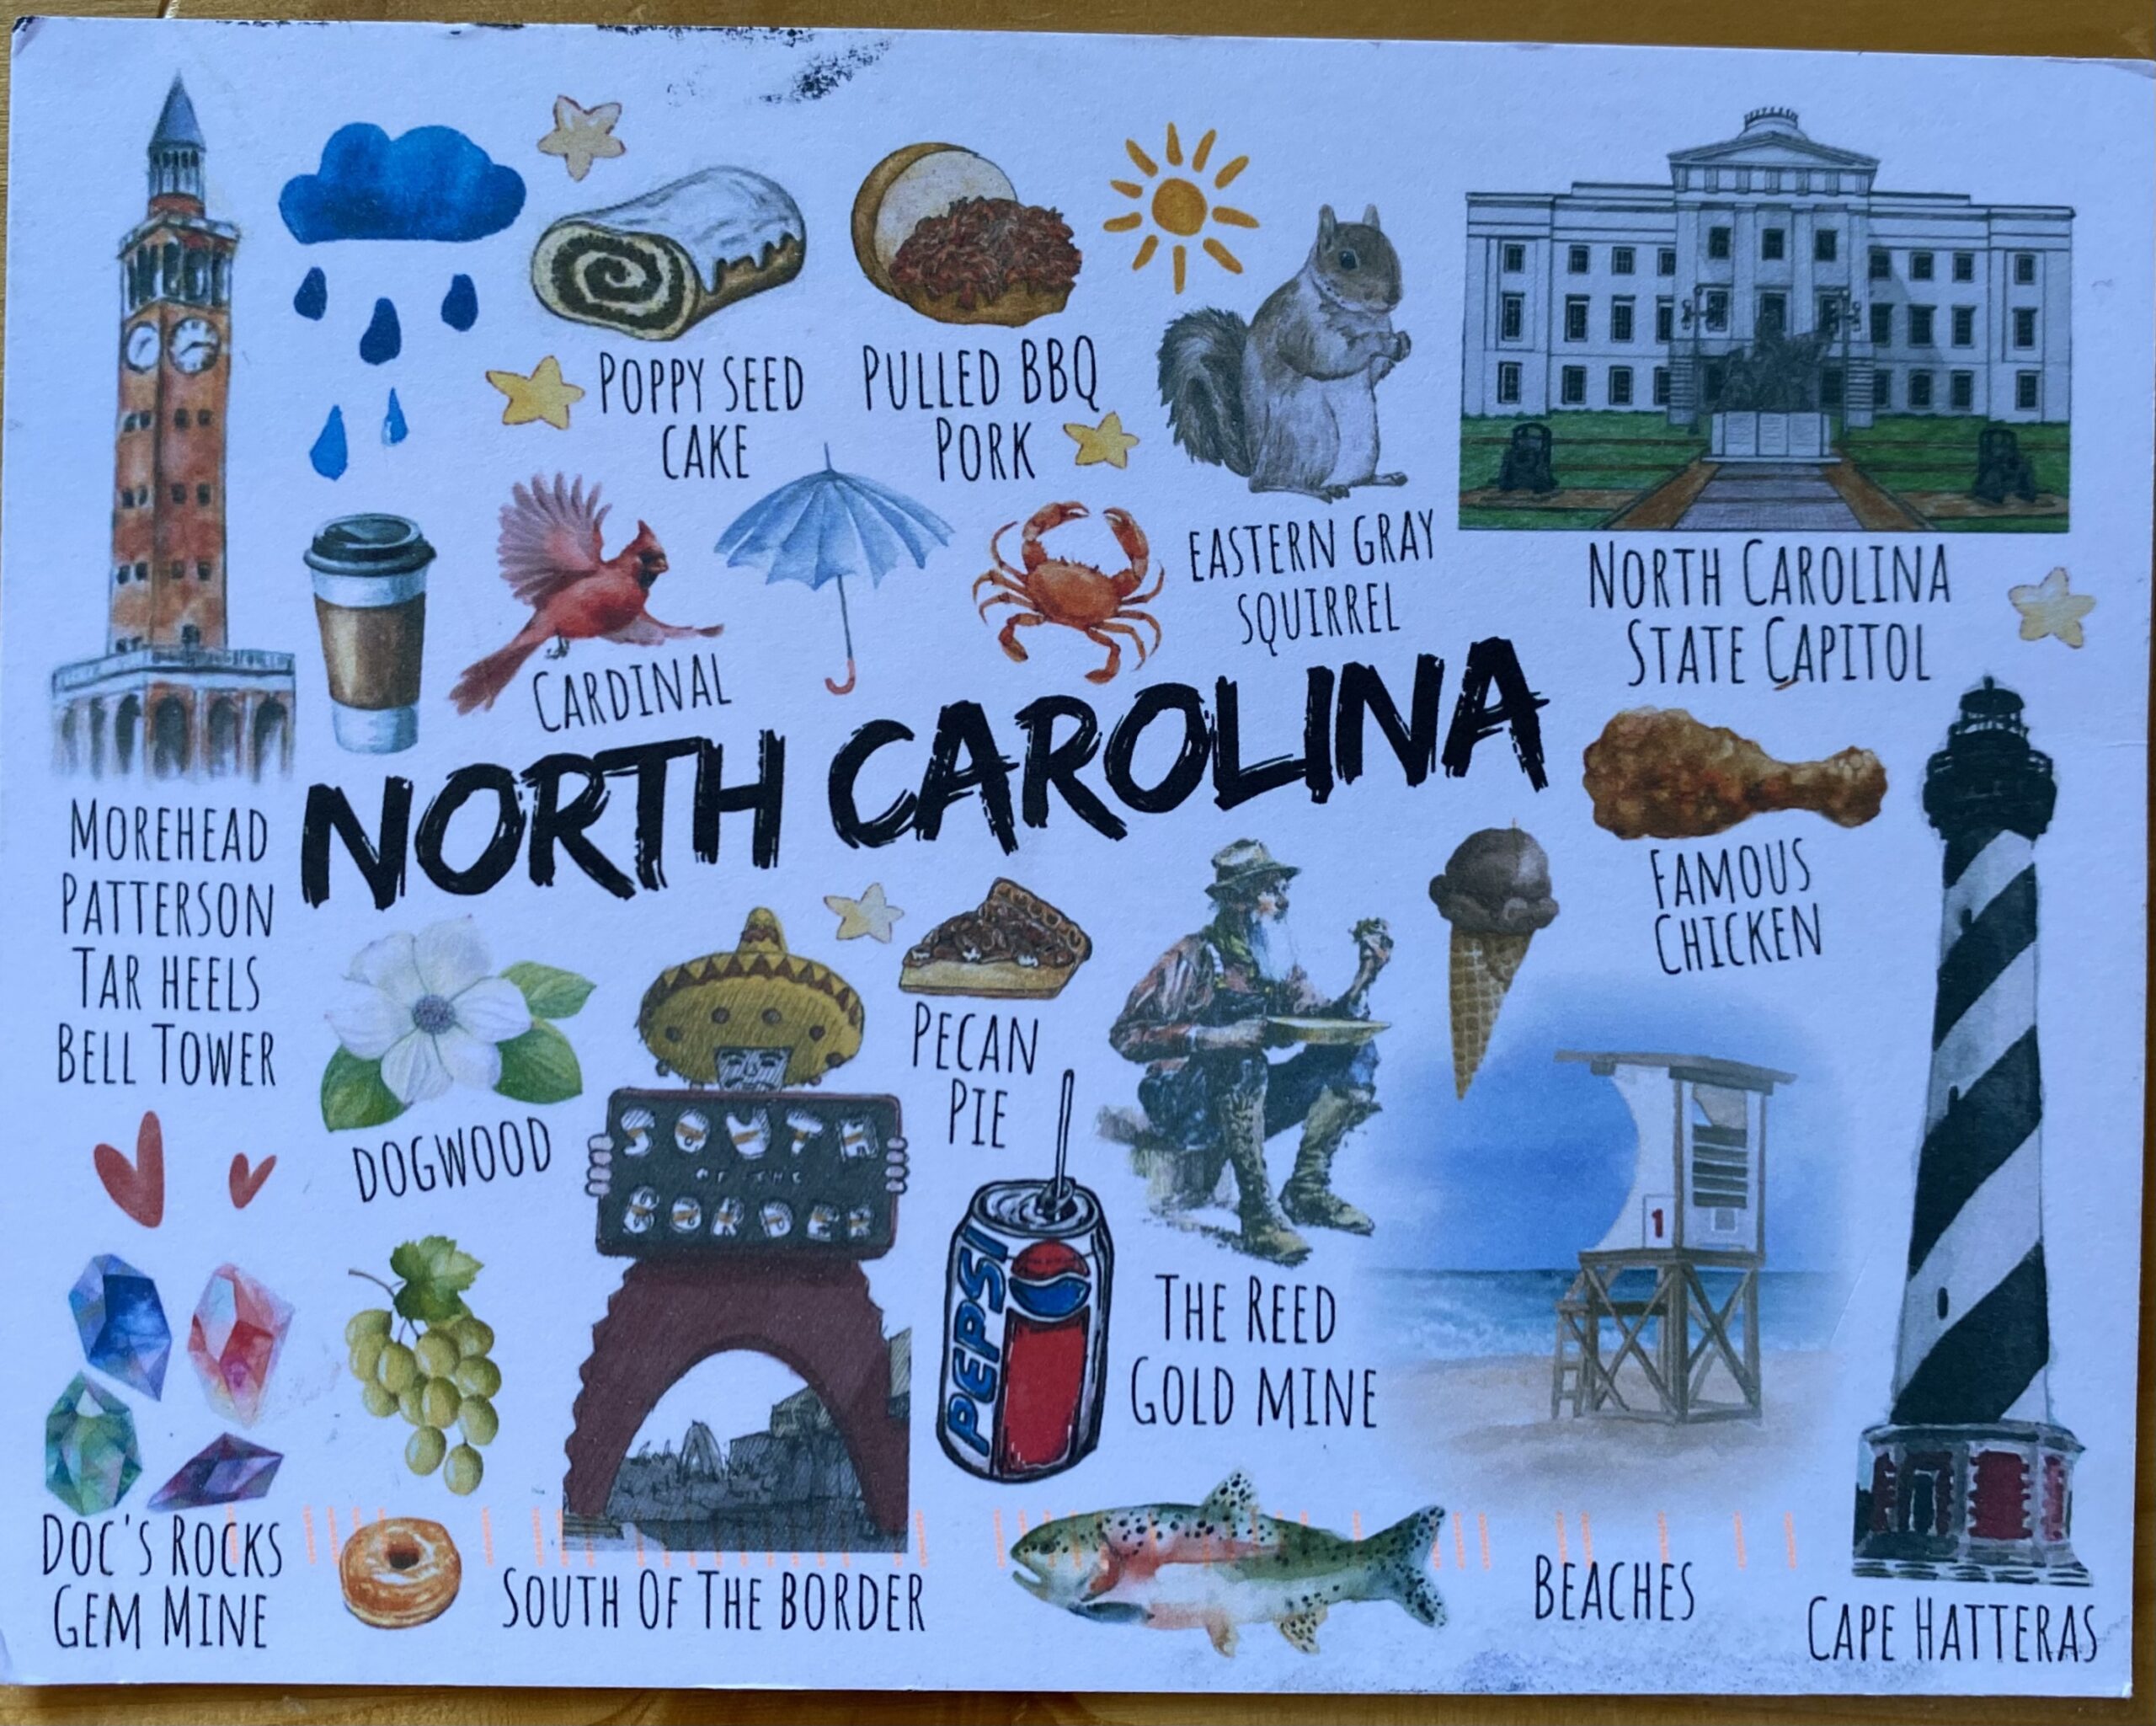 Postcard from North Carolina, received August 10 2022